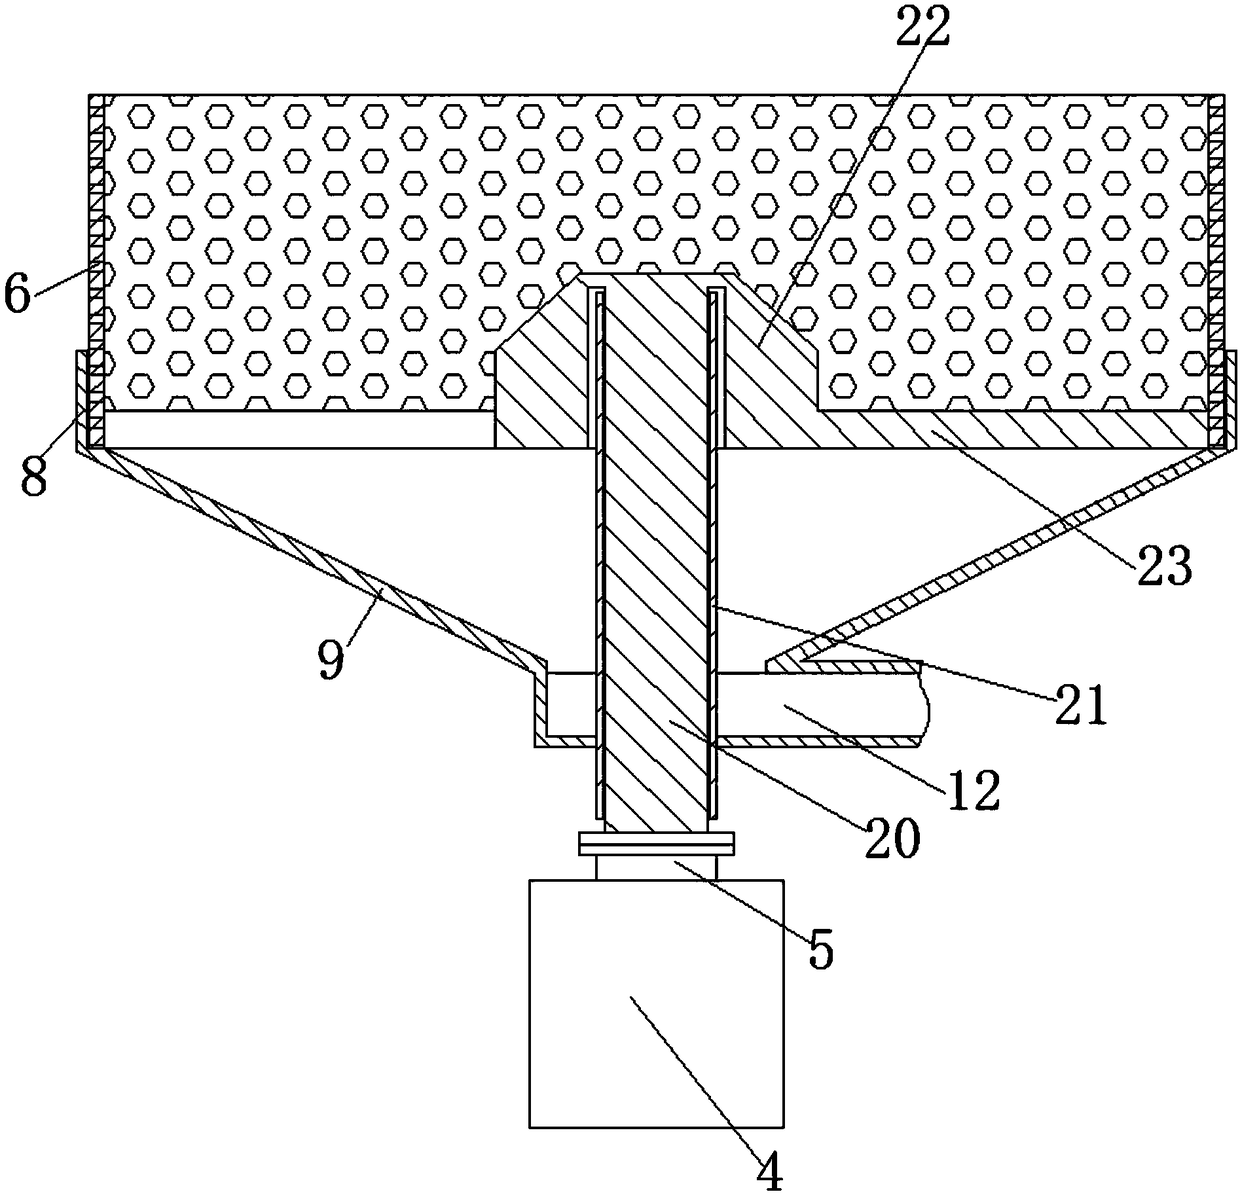 Solid-liquid separation device arranged in filtering tank